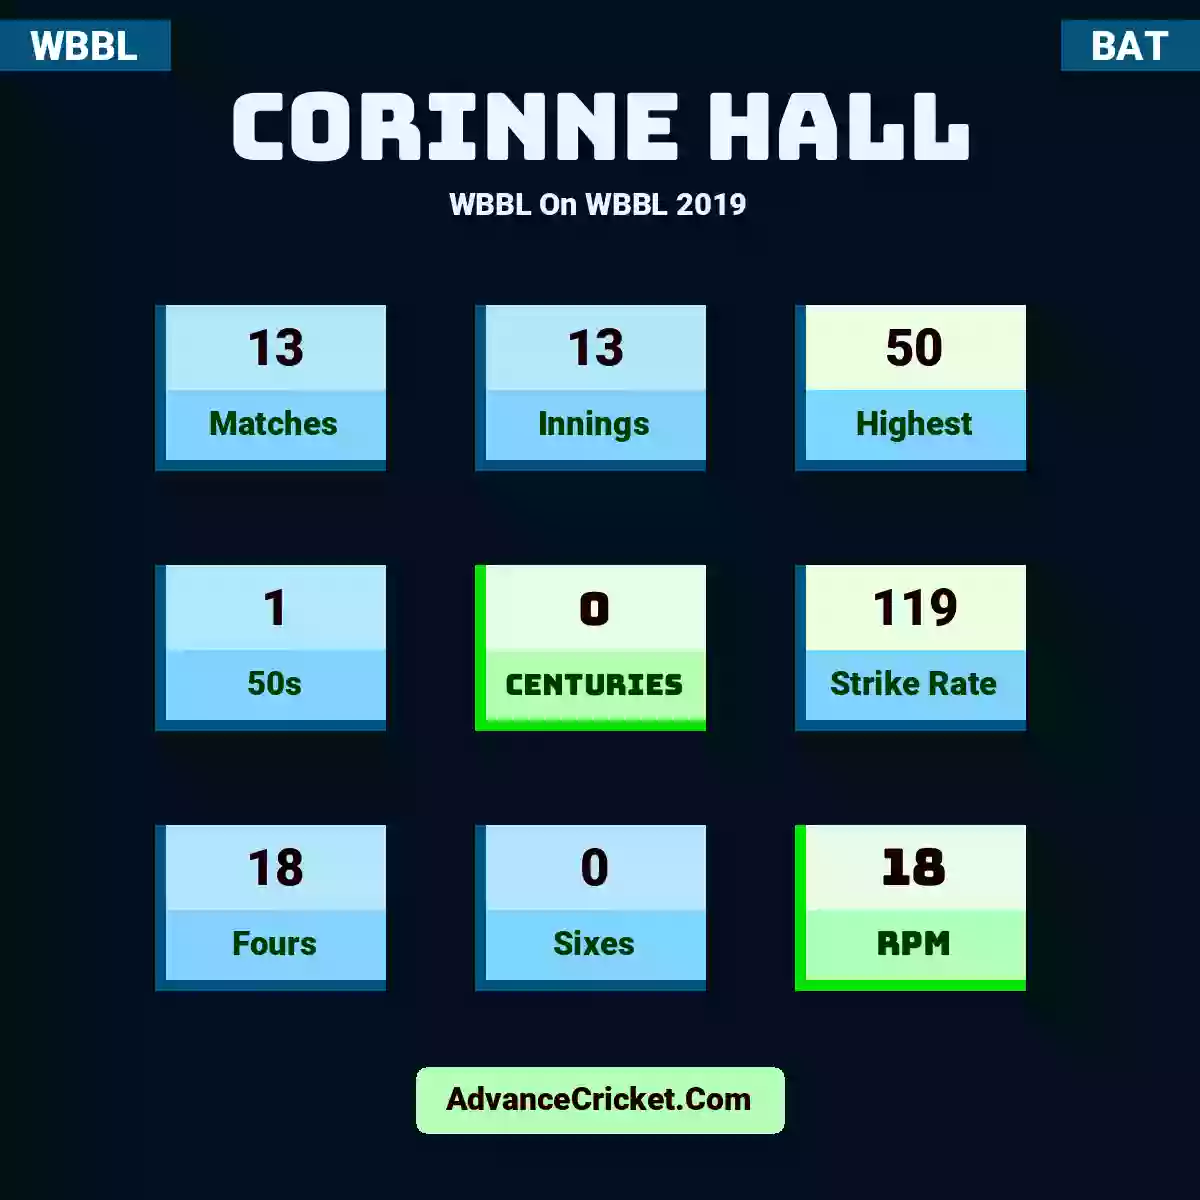 Corinne Hall WBBL  On WBBL 2019, Corinne Hall played 13 matches, scored 50 runs as highest, 1 half-centuries, and 0 centuries, with a strike rate of 119. C.Hall hit 18 fours and 0 sixes, with an RPM of 18.